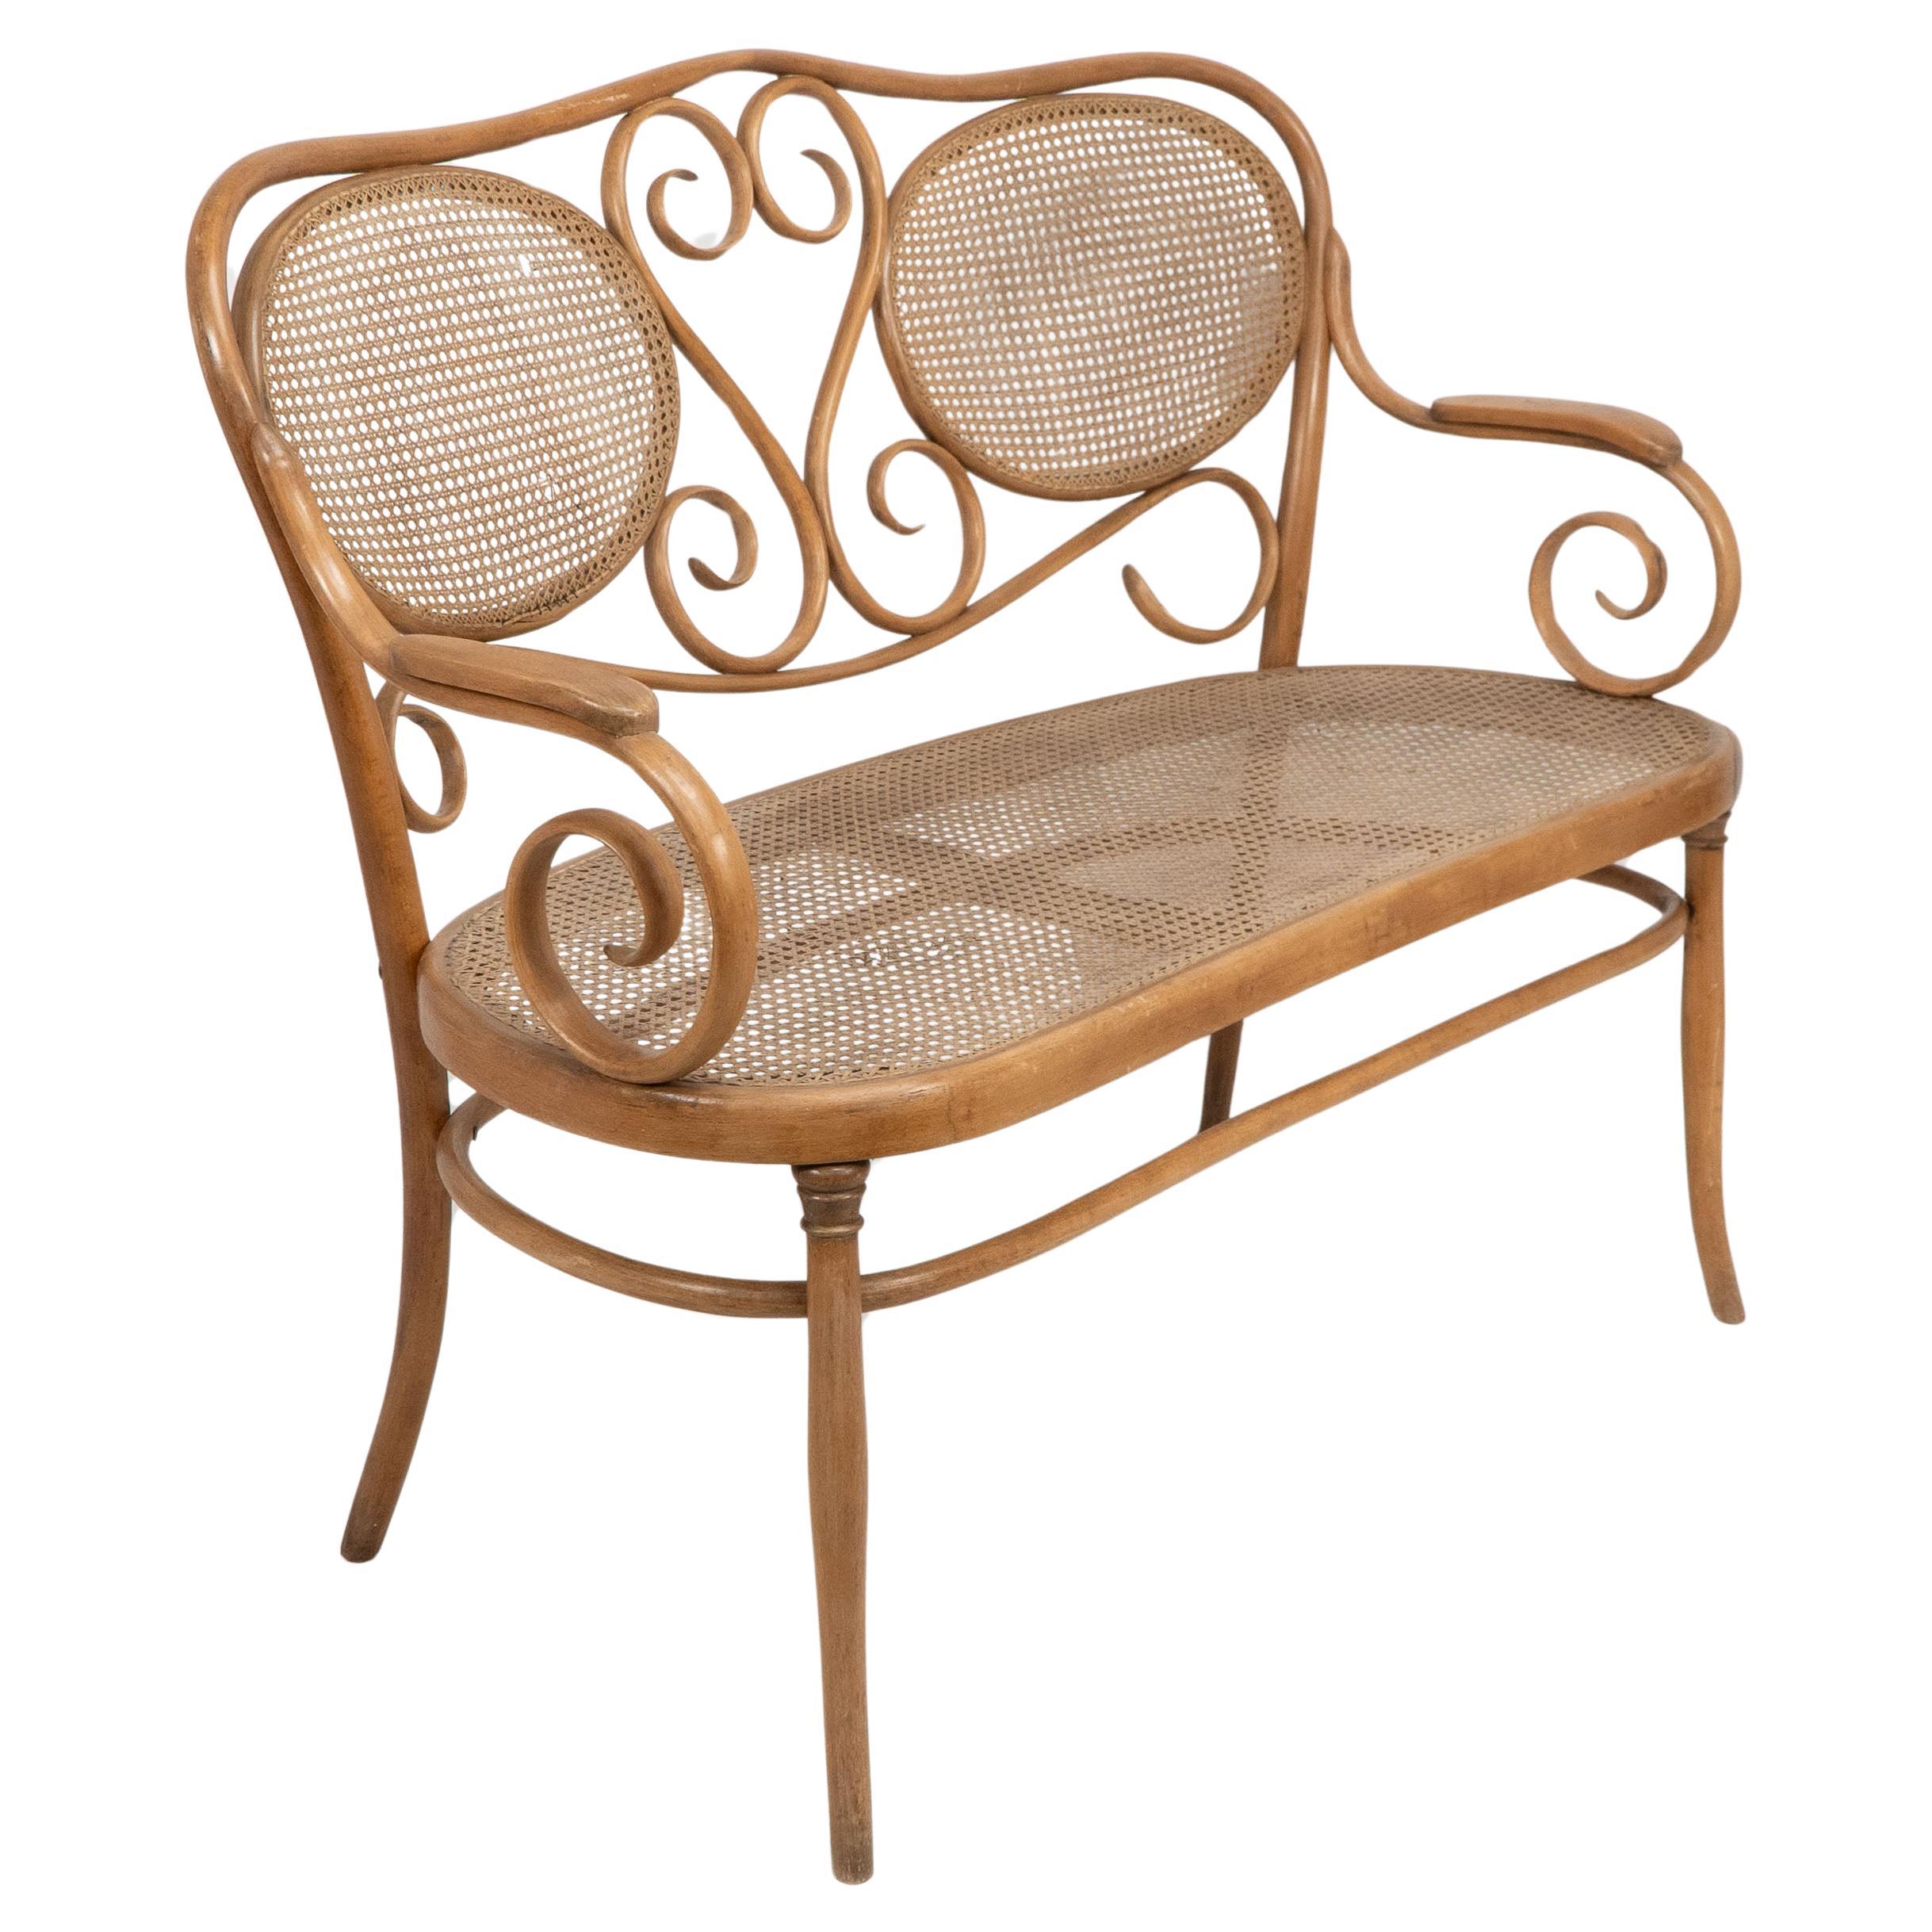 Thonet. A bentwood settee with scrollwork decoration with caned seat & back